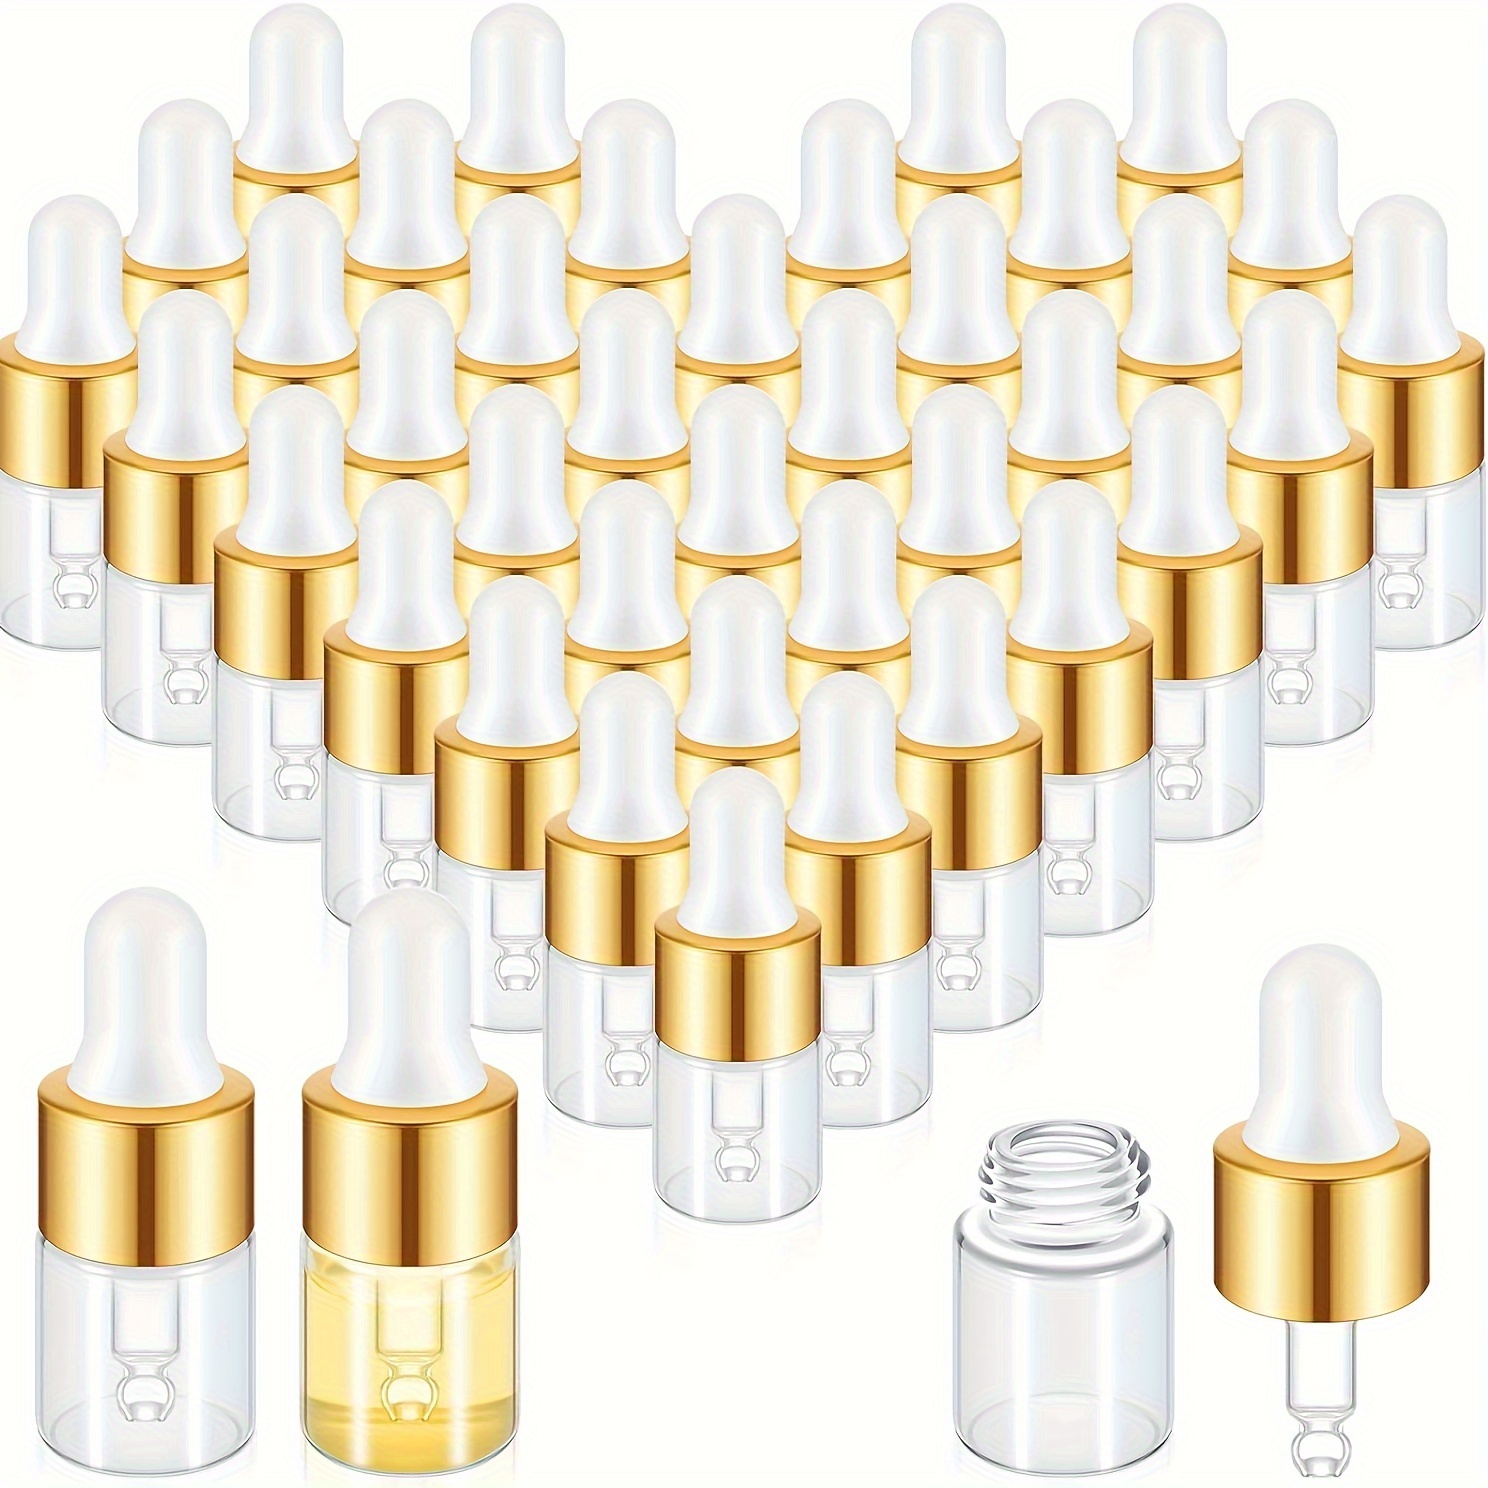 

100 Pcs Mini Dropper Bottles Clear Sample Bottles Small Sample Vials With Golden Lid For Traveling Essential Oils Cosmetic Liquid Sample Perfume (2/3 Ml)